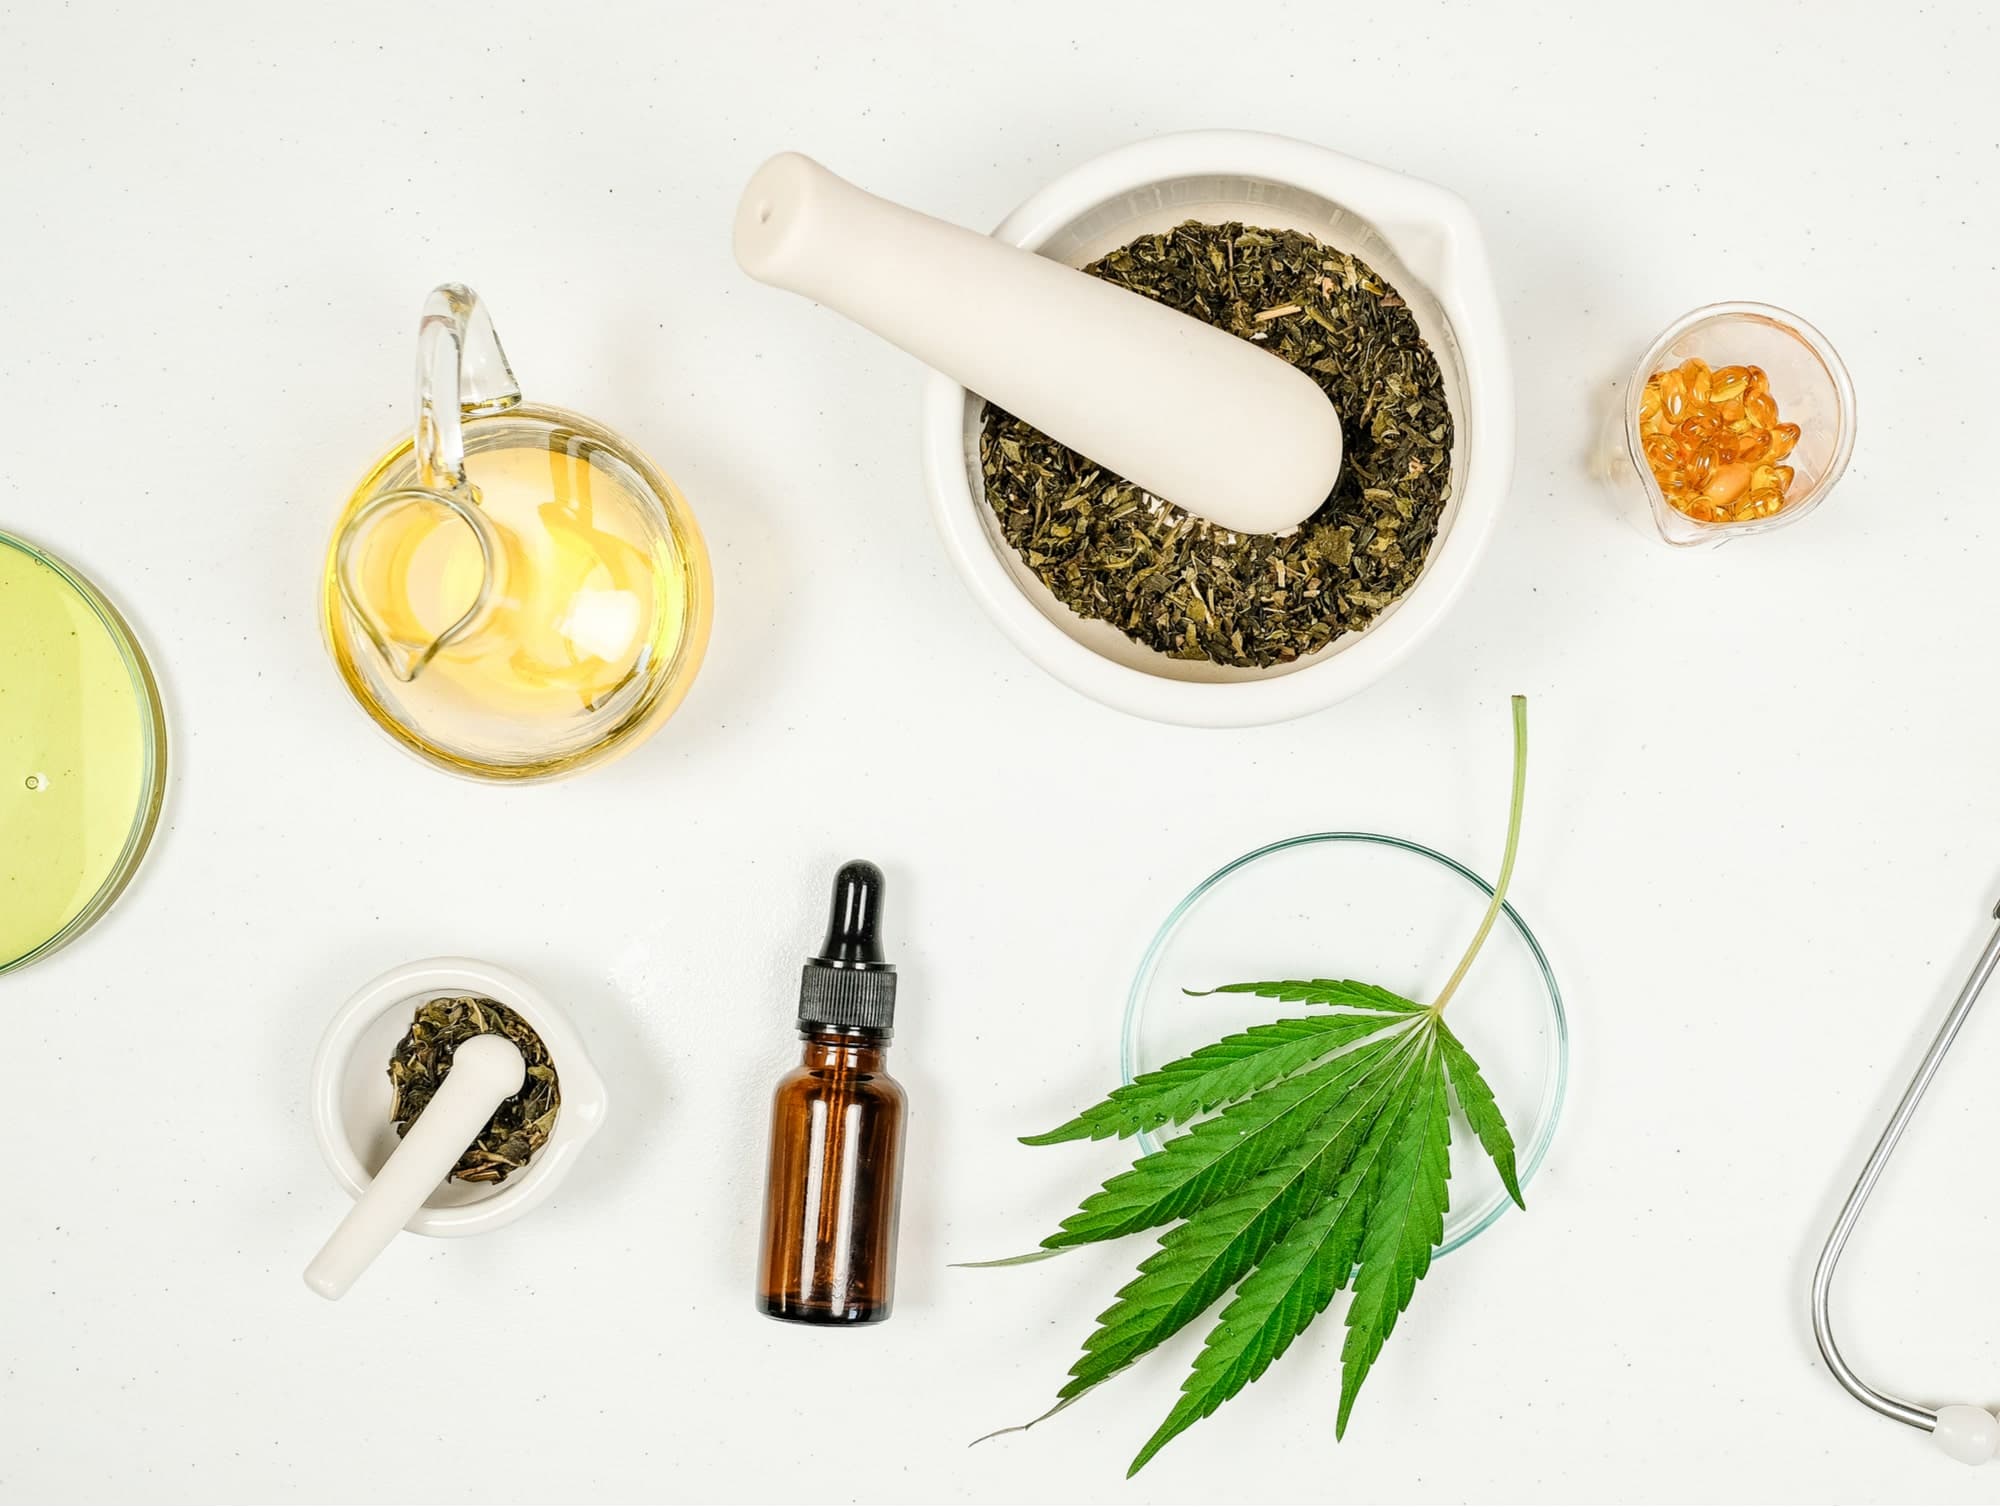 How to Make CBD Oil at Home: 7 DIY Simplified Steps